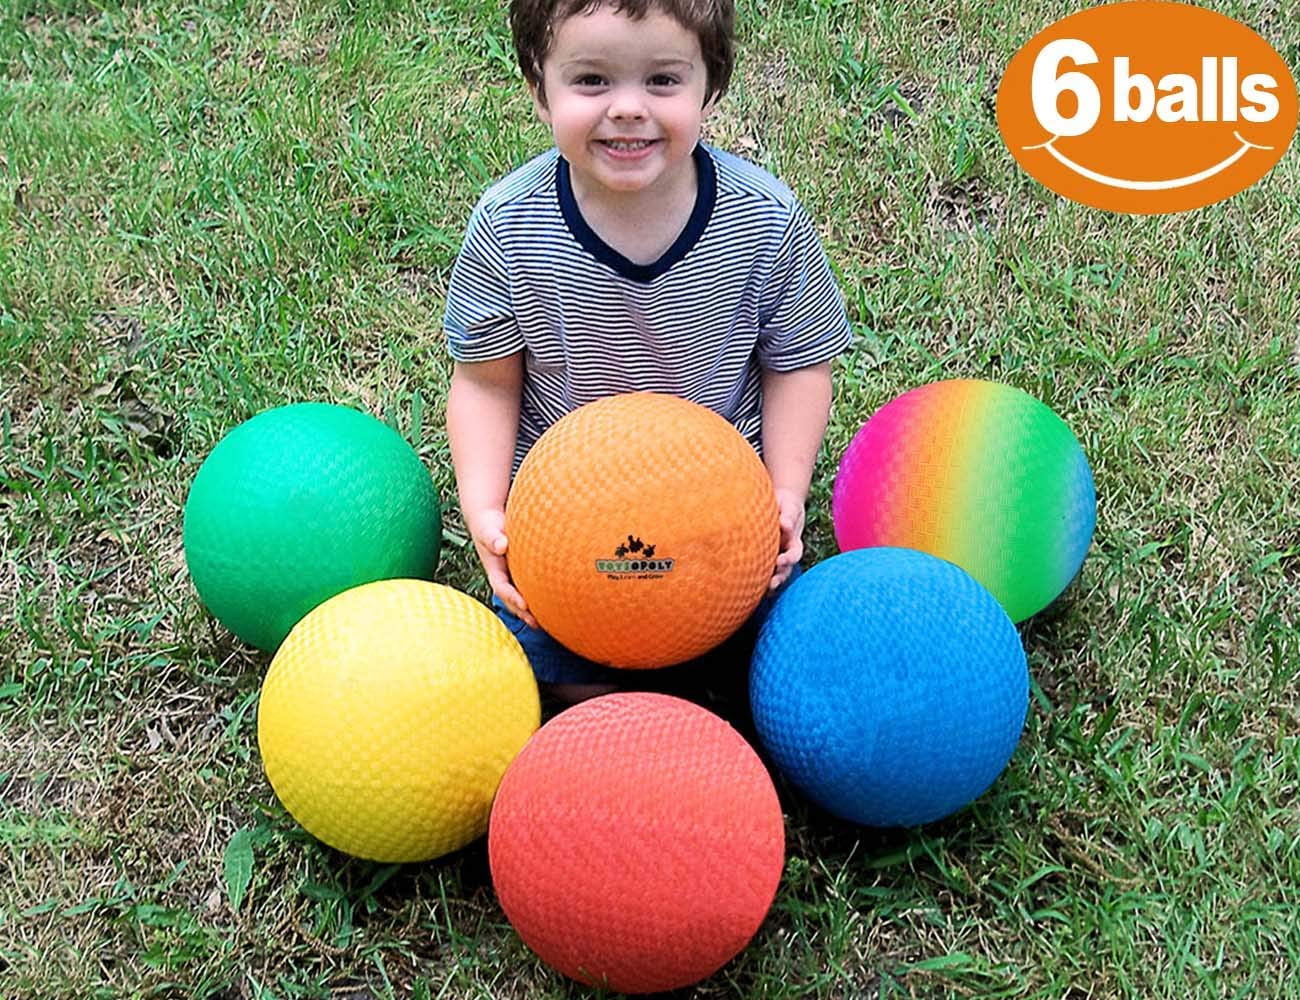 Best Bouncy Dodge Ball Premium Playground Balls 13 inch Pump Handball Kickball Four Square for Boys Girls Adults Pack of 2 Exercise Yoga Balls Workout Therapy Fitness Pilates Balance 